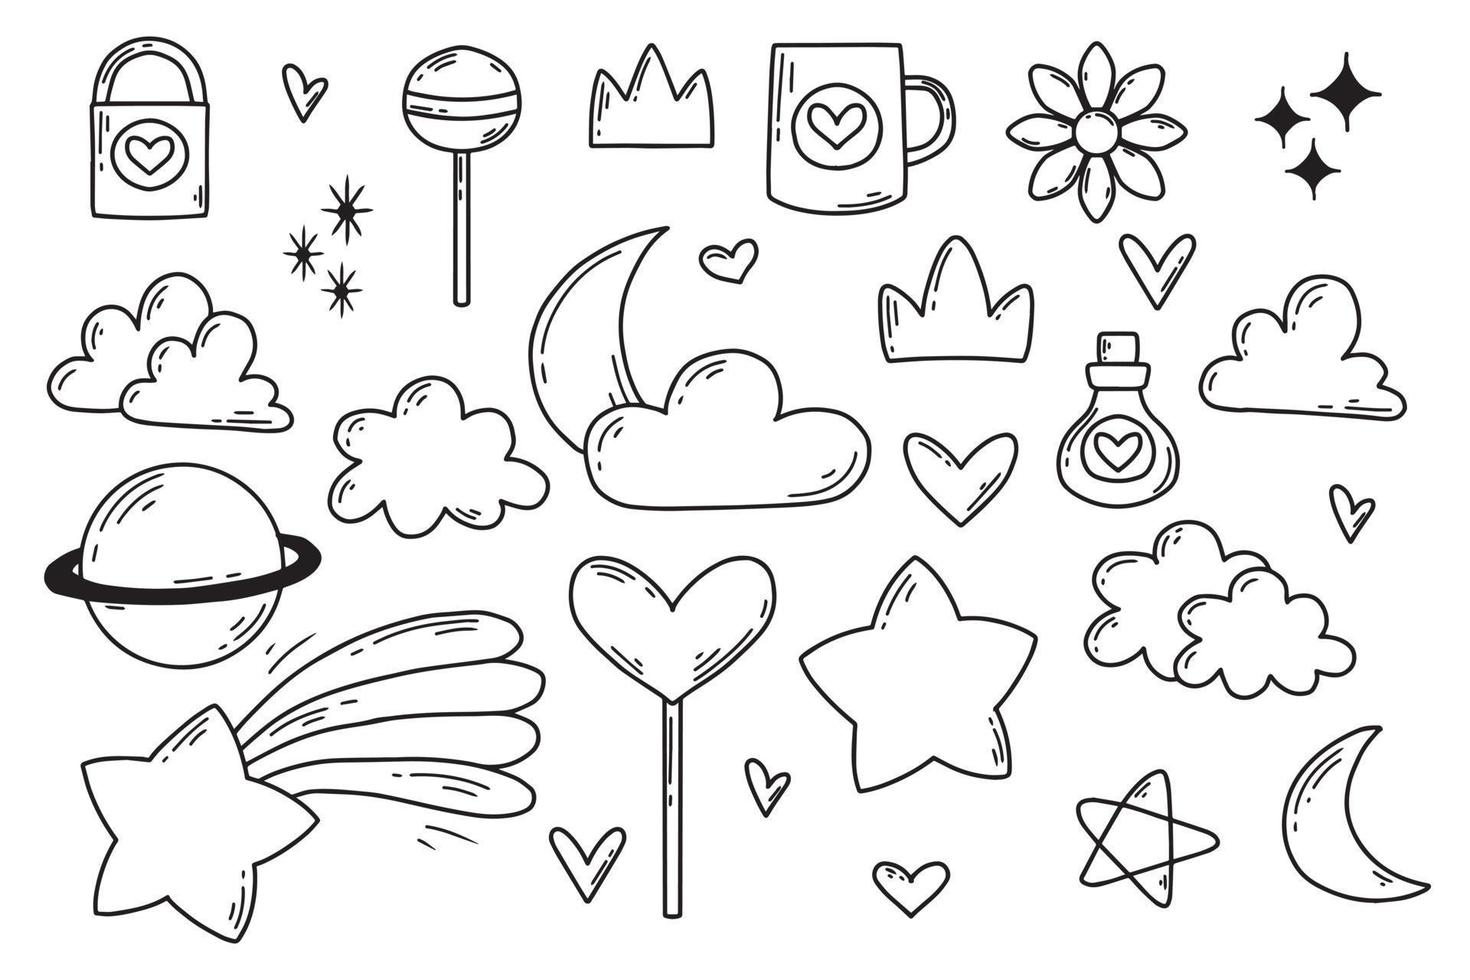 Cute set of elements. Elements for design. Heart, stars, clouds, lollipops, moon, planet, shooting star. Doodle style. Vector illustration.